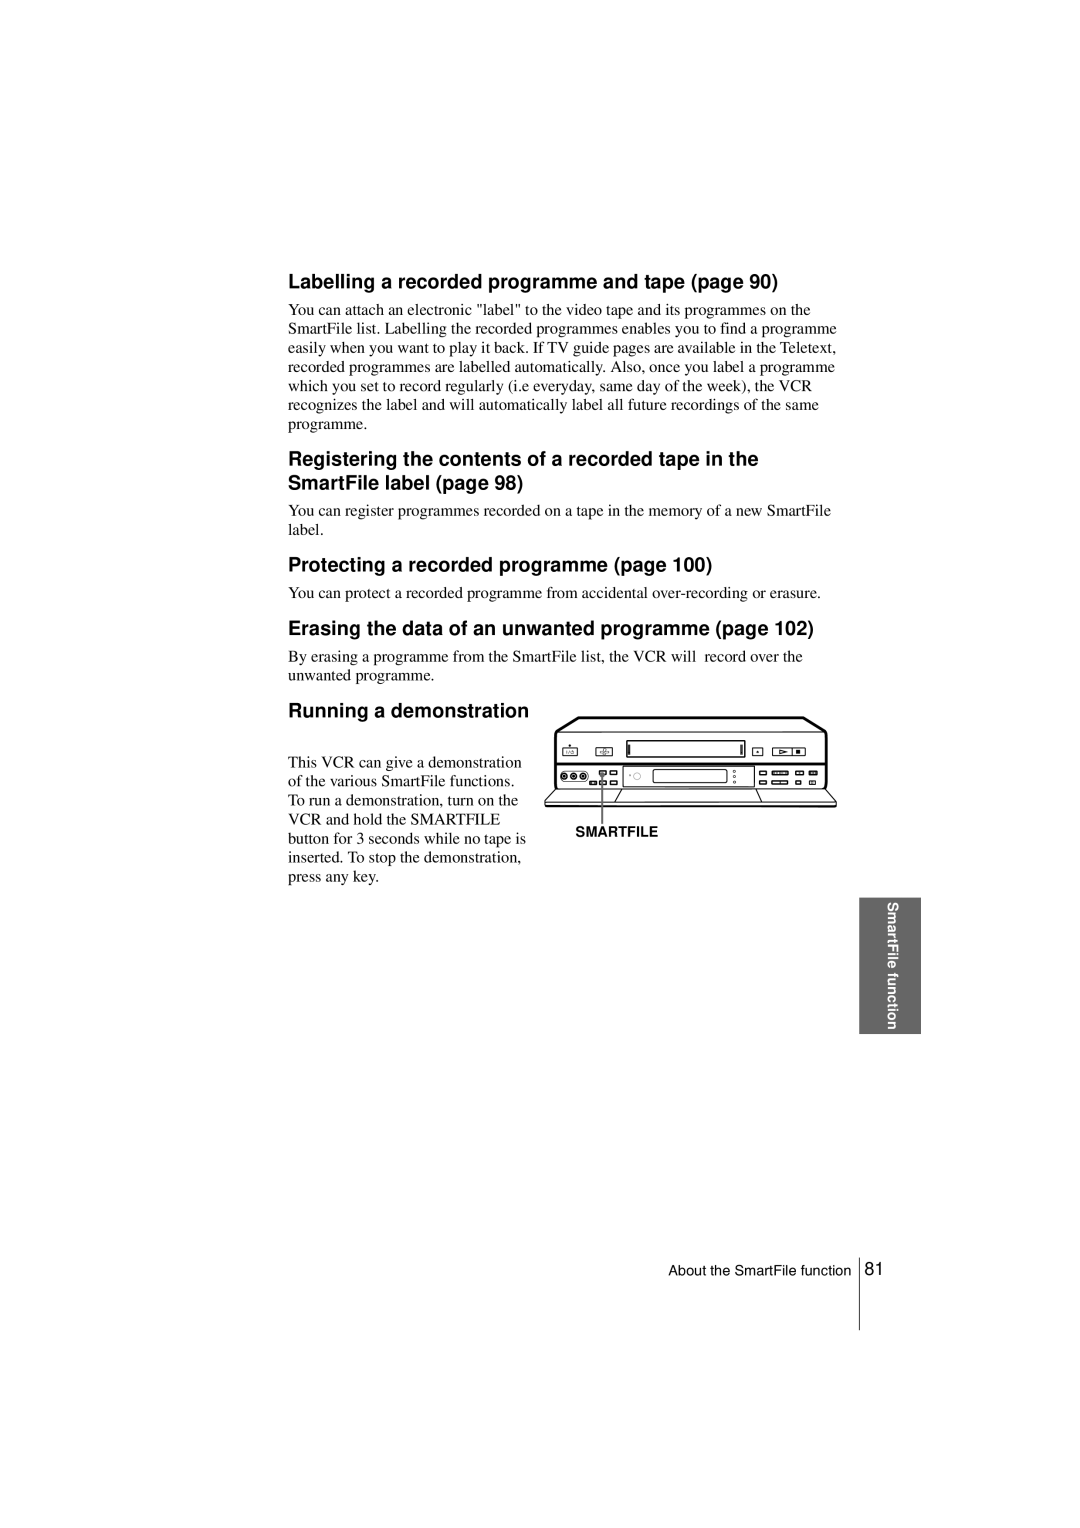 Sony SLV-SF990G manual Labelling a recorded programme and tape page, Protecting a recorded programme page, Smartfile 